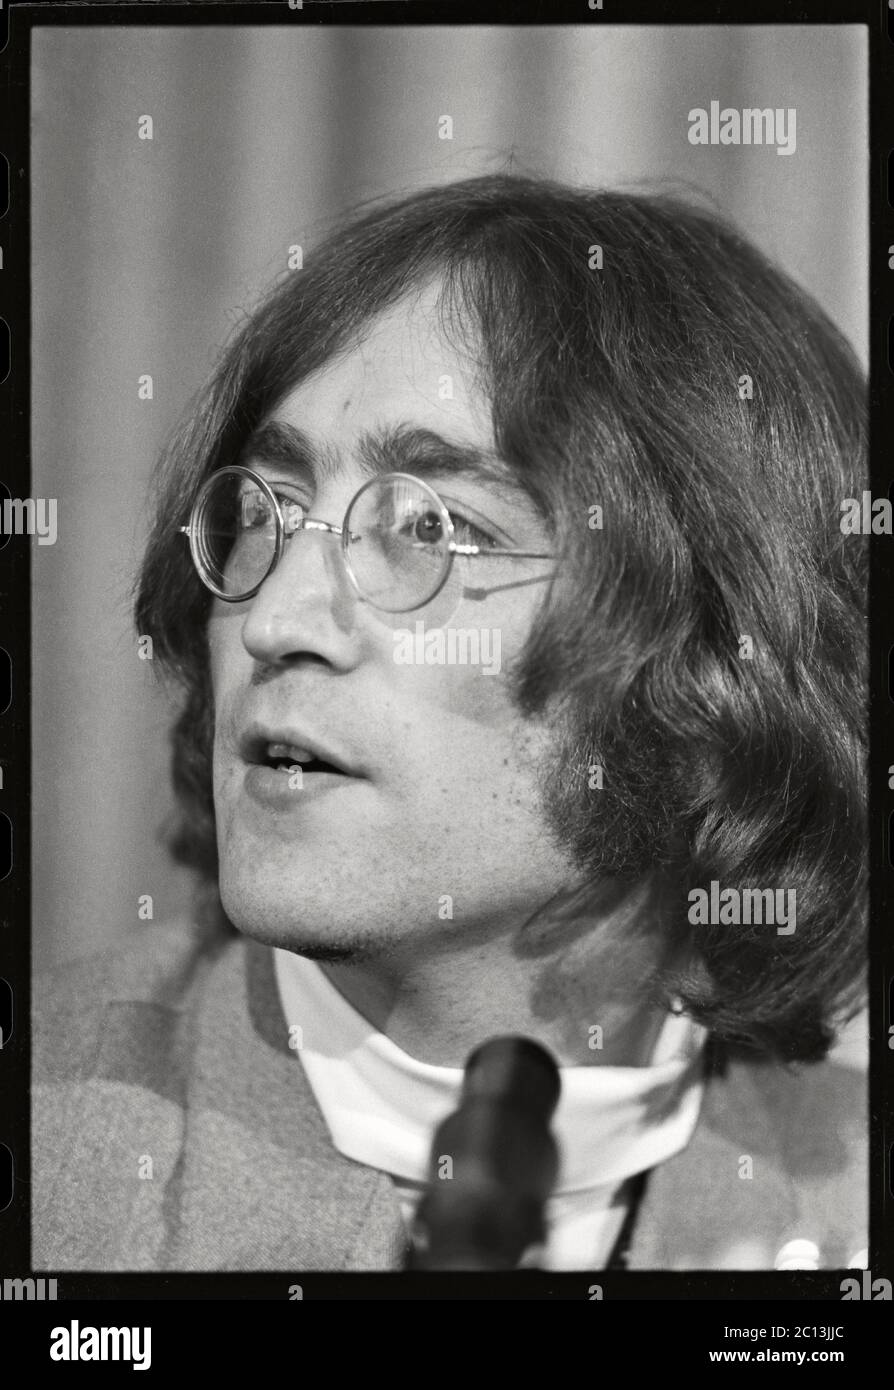 John and Paul at a press conference on May 14th 1968, 1:30pm at New York's Americana Hotel. Here John and Paul described their vision and their hopes for their new Apple Corp. Image from 35mm negative. Stock Photo